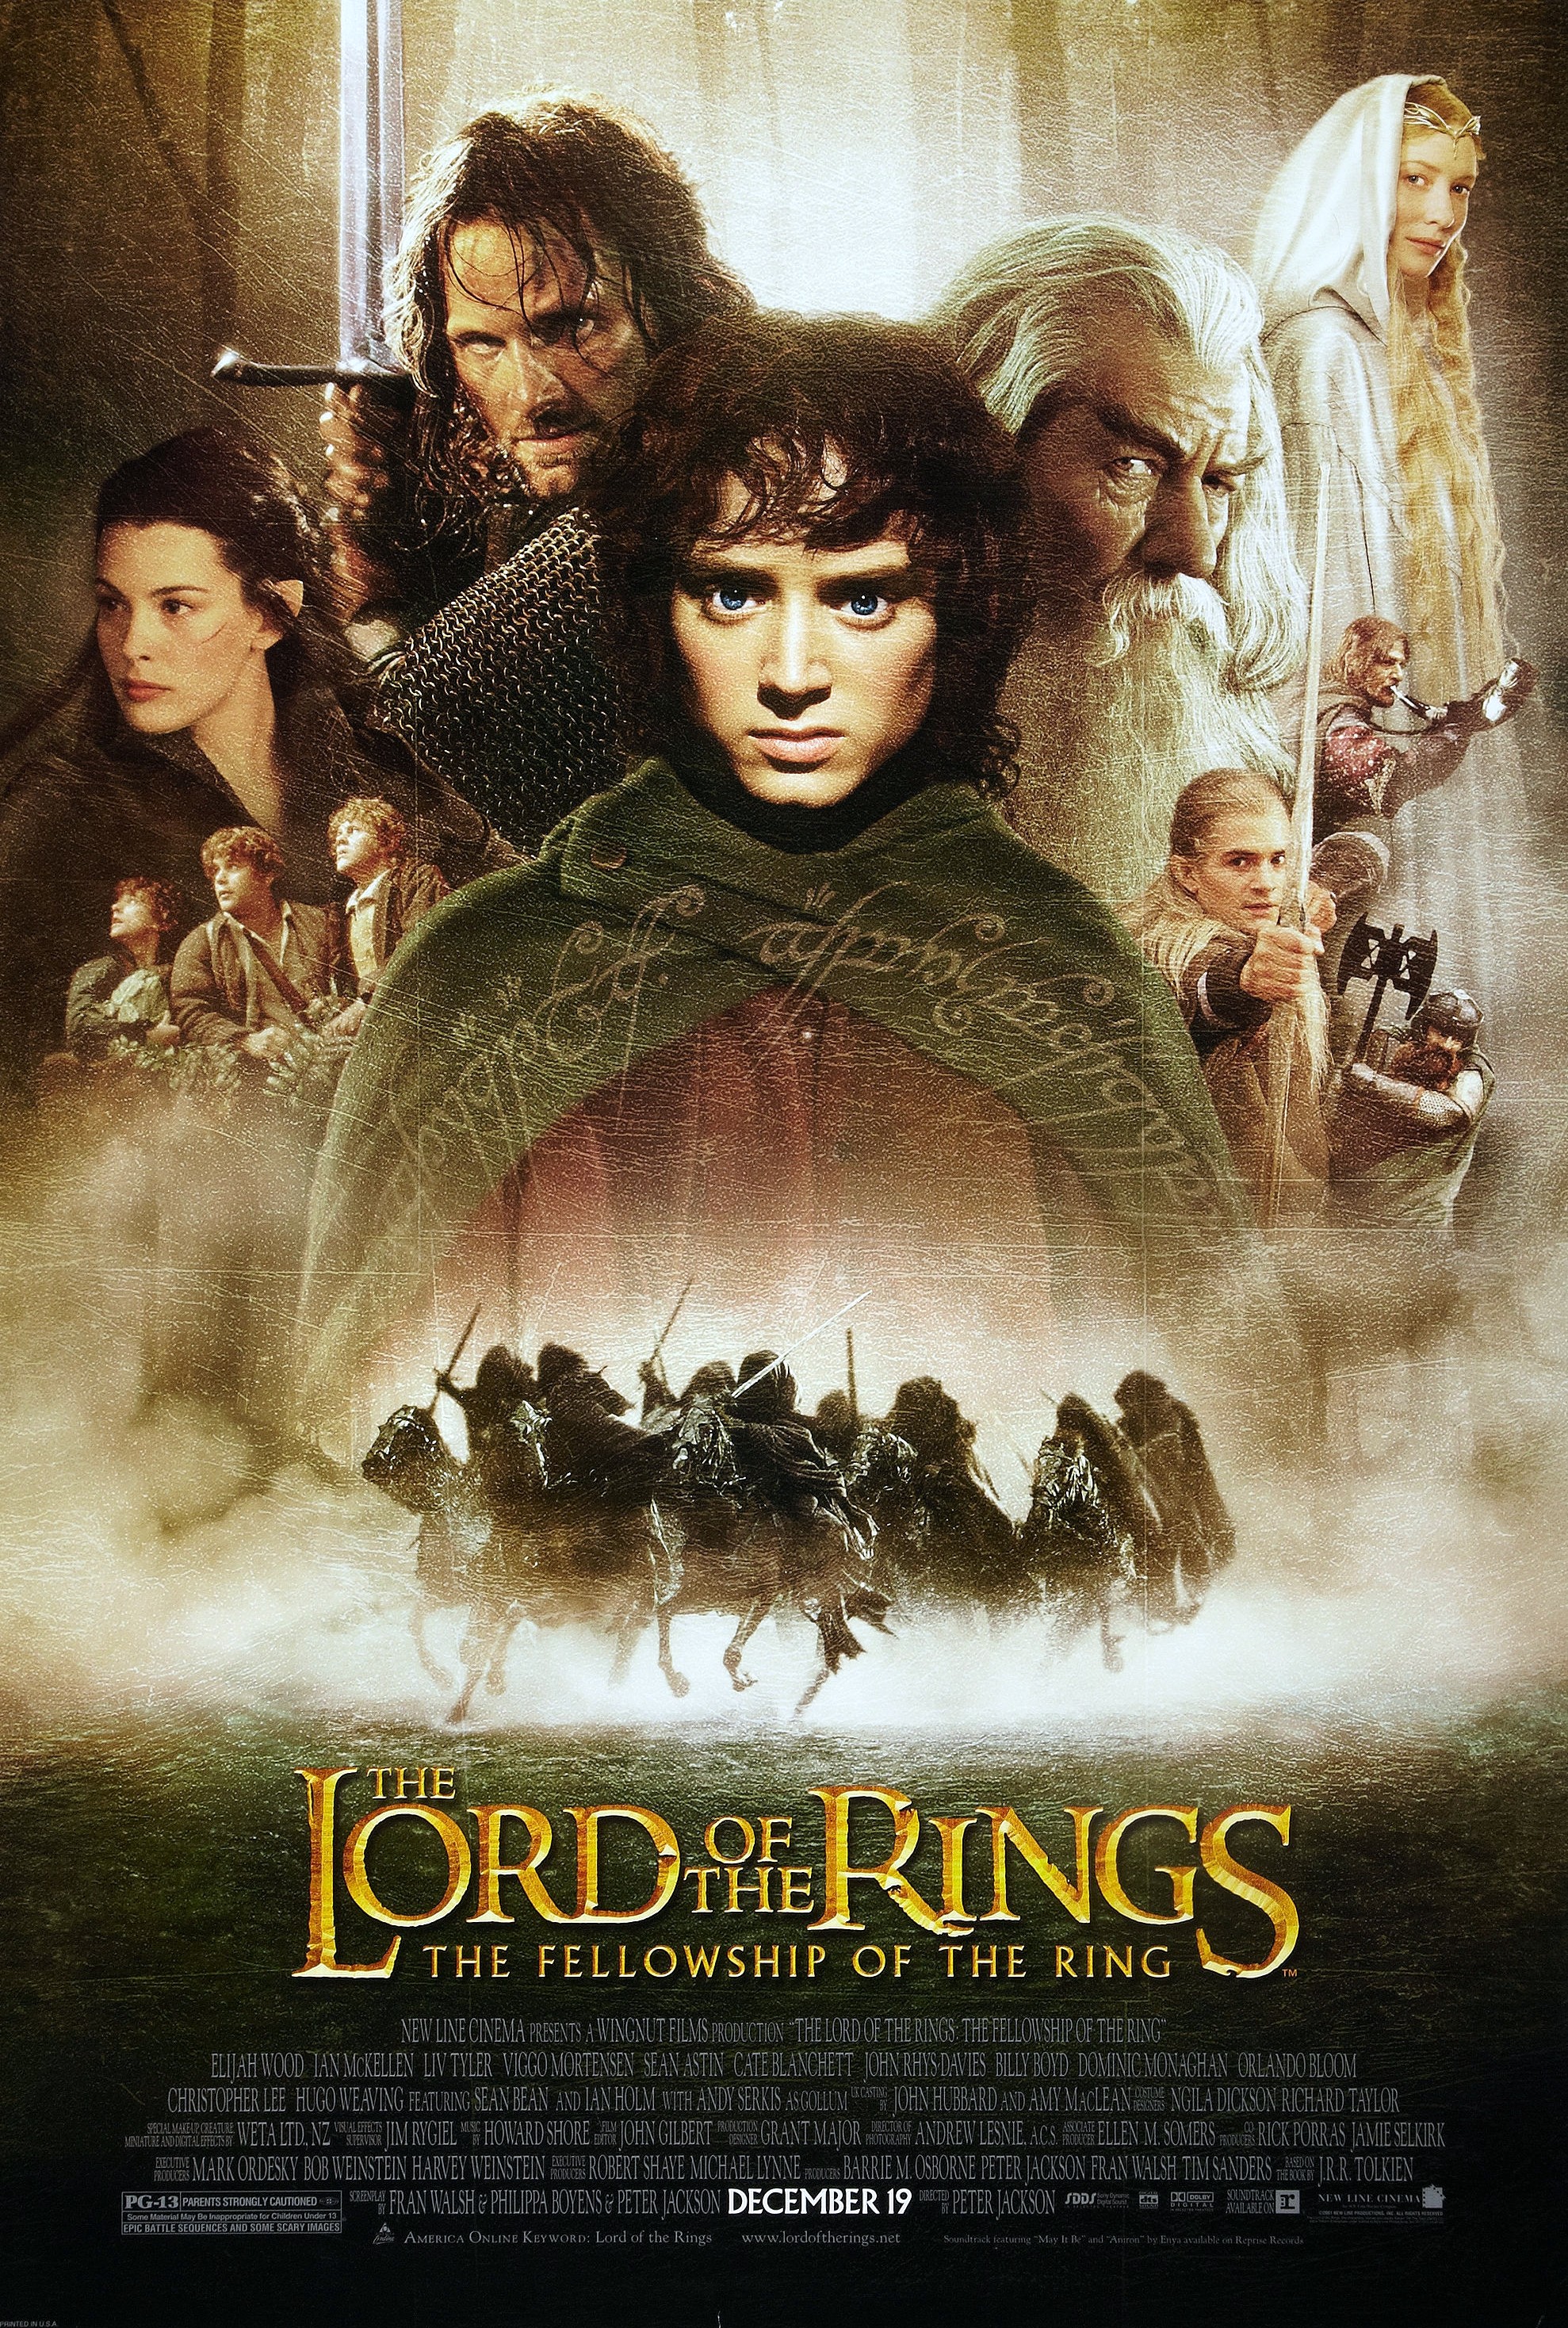 The Lord Of The Rings The Fellowship Of The Ring 2001 EE 1080p BluRay x264 SiNNERS AsRequested